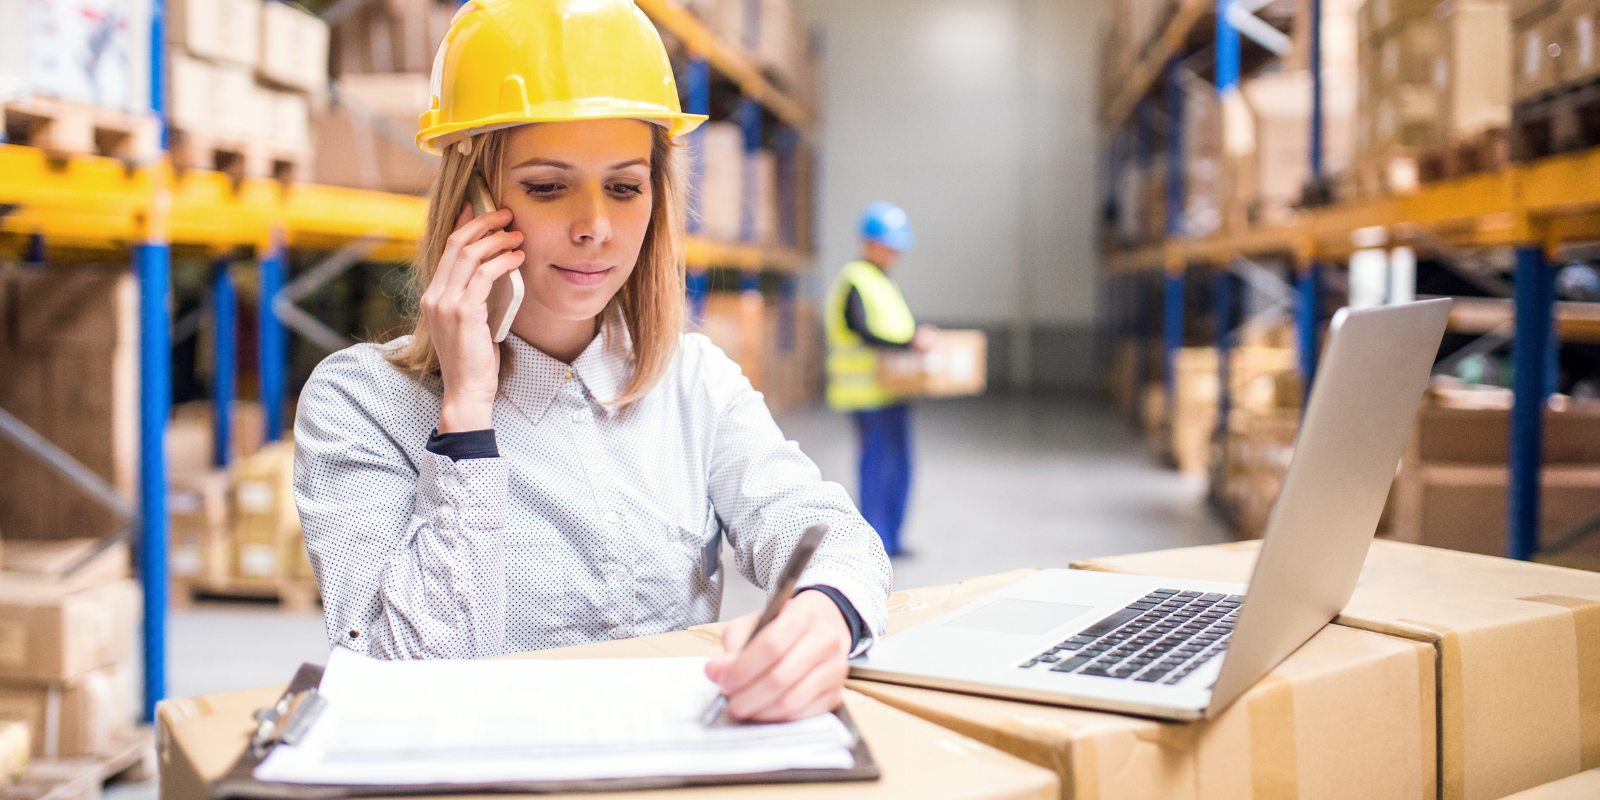 supply chain skills in action - a woman with a phone, laptop, and notebook in a warehouse